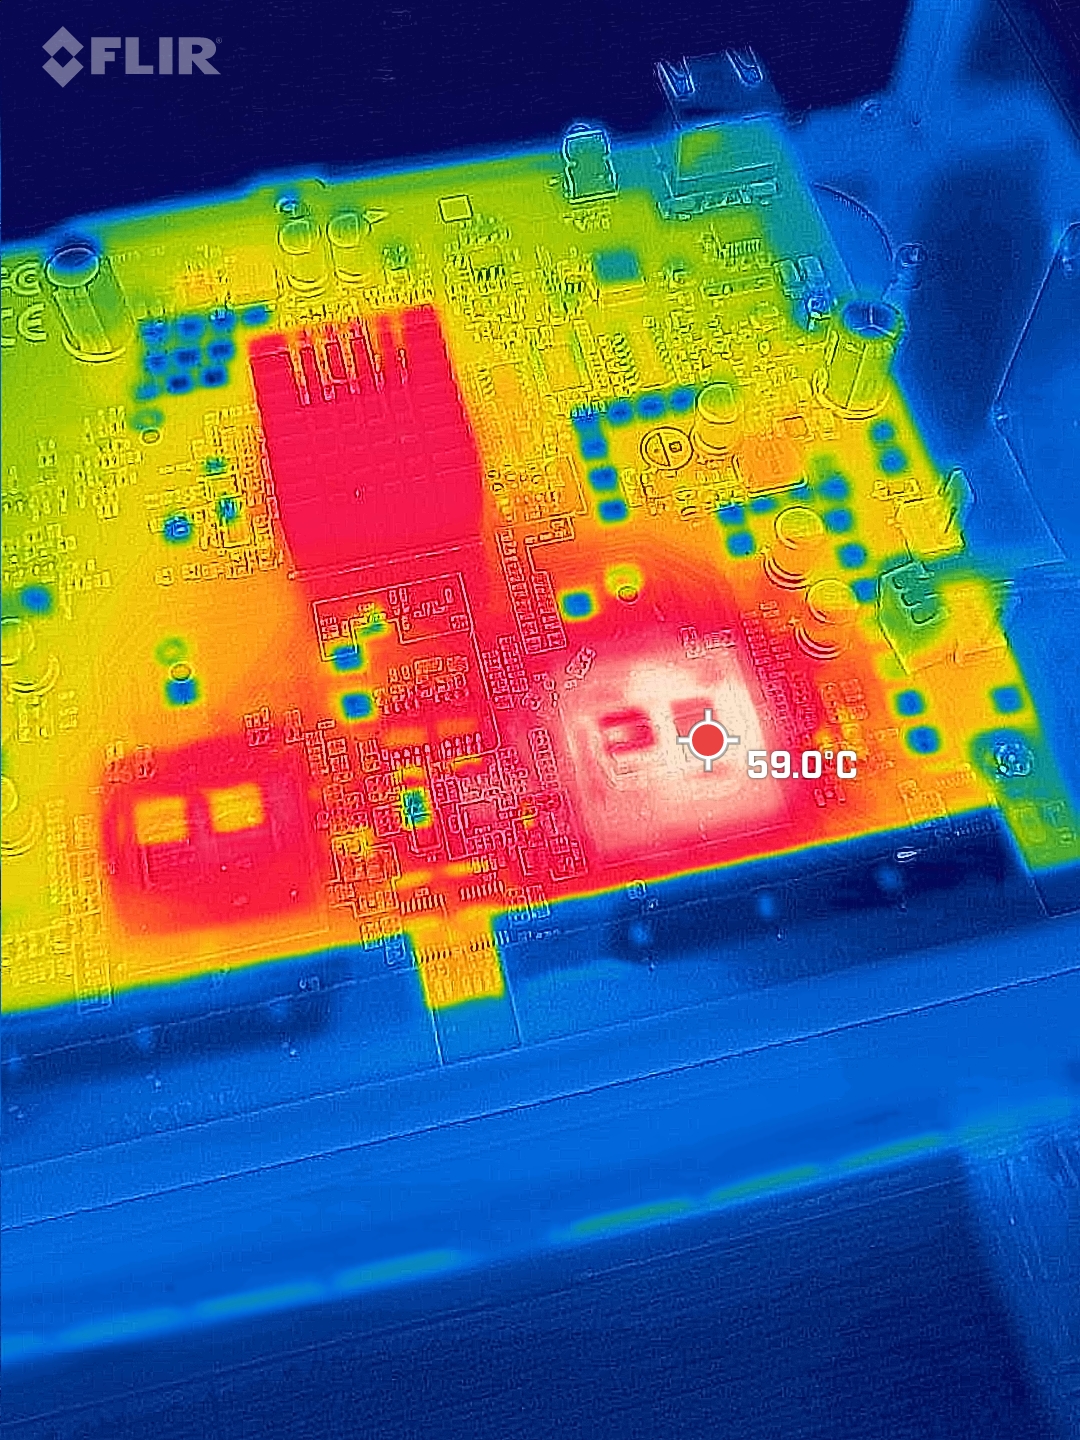 thermal picture of Industrial 10 gbps switch with zero cooling